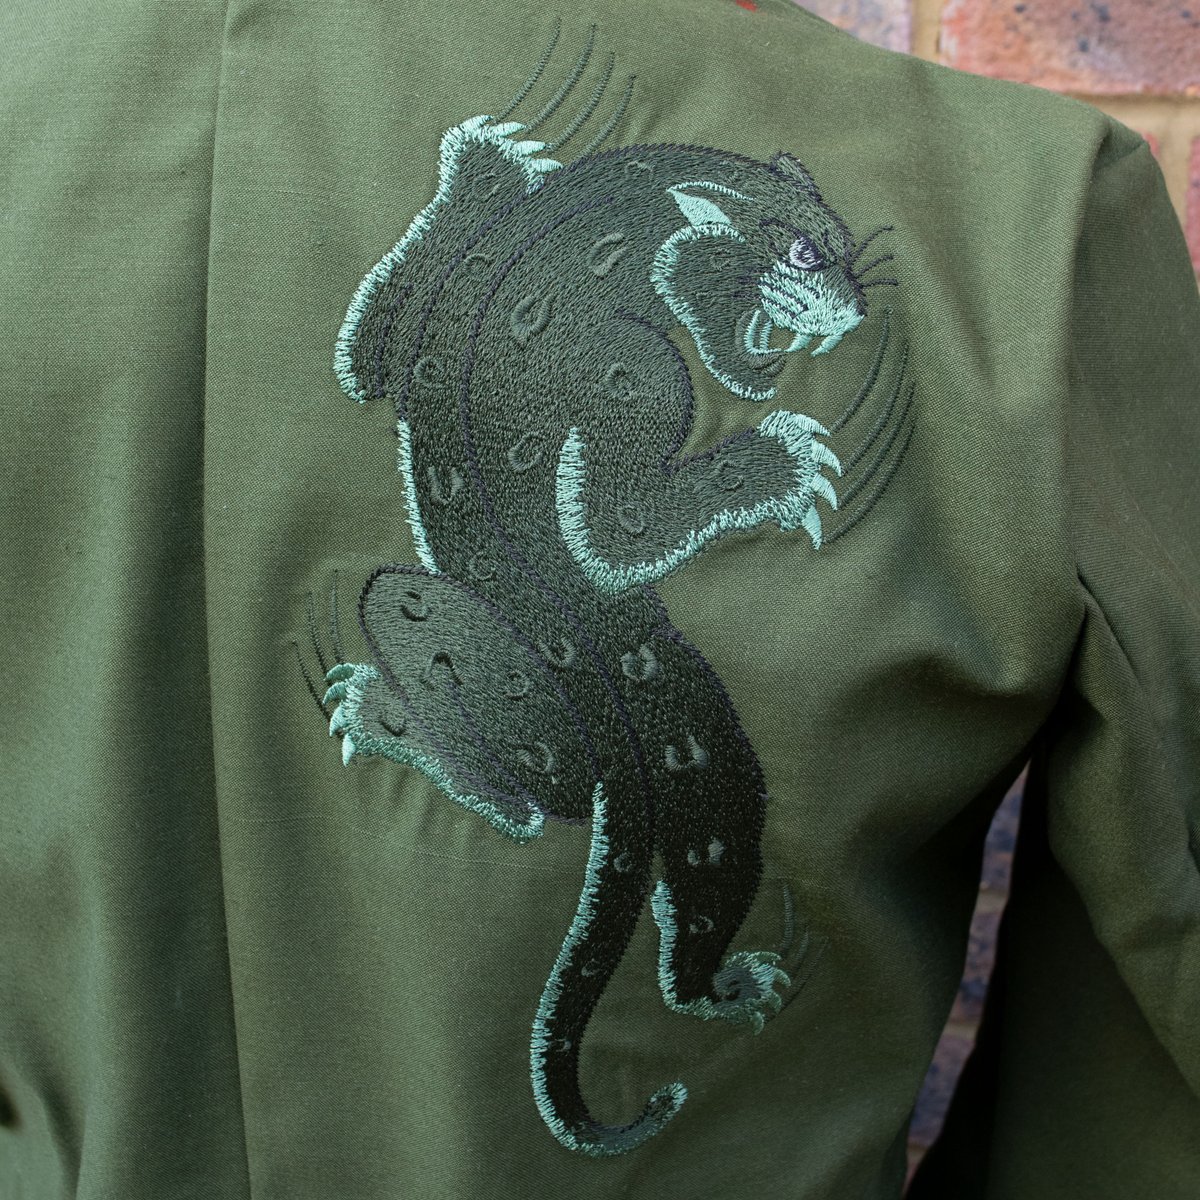 Upcycled Swedish military field jacket, embroidered with scratch motifs and leopard over the shoulder.

Military jacket thrifted from @wolfvintage

#customembroidery #leopard #tattooembroidery @customizedclothing #upcycledclothing